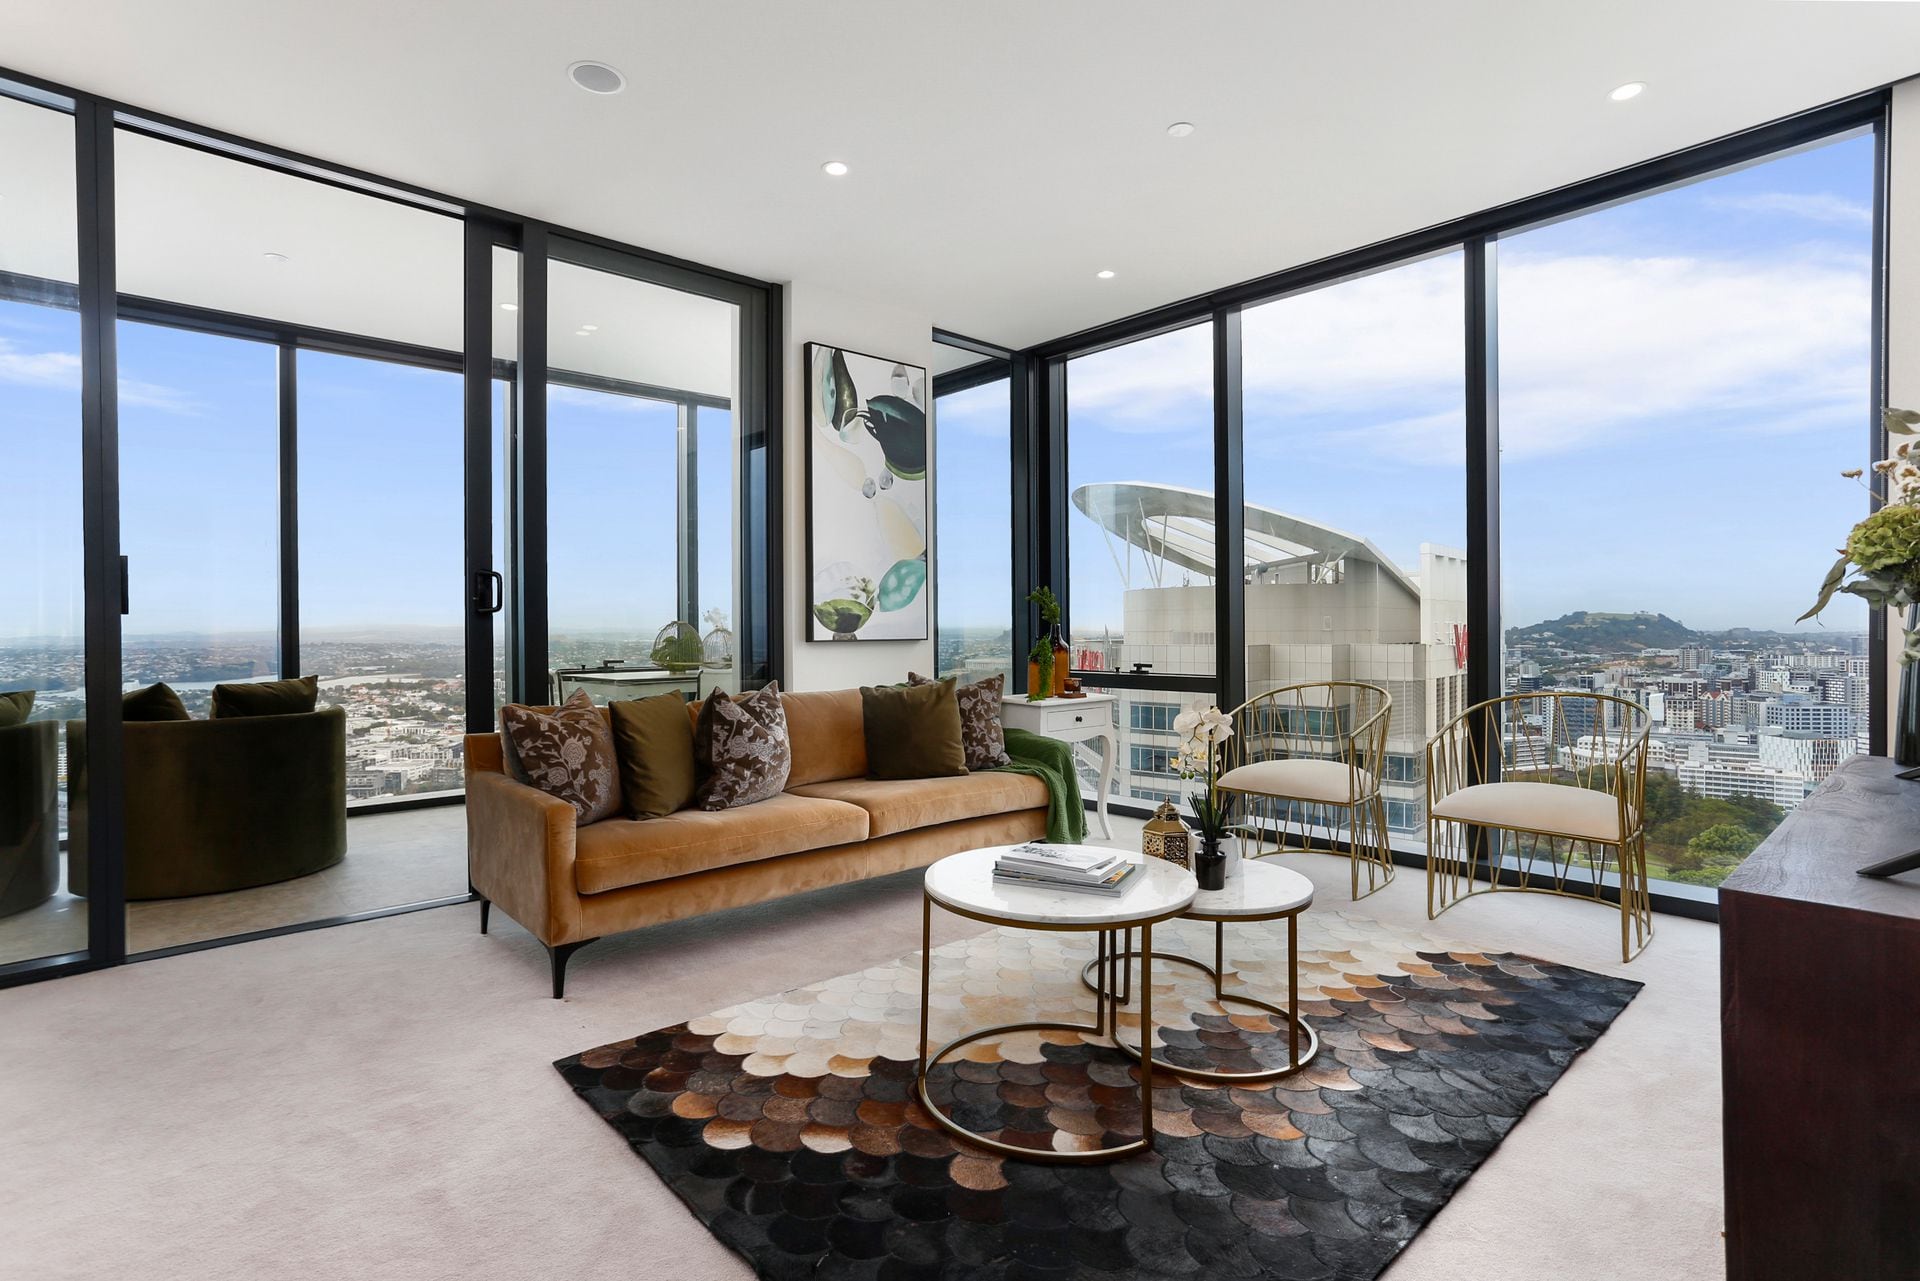 Inside NZ's tallest apartment tower The Pacifica: Annual report reveals  floods, blockages and defects in $300m building - NZ Herald